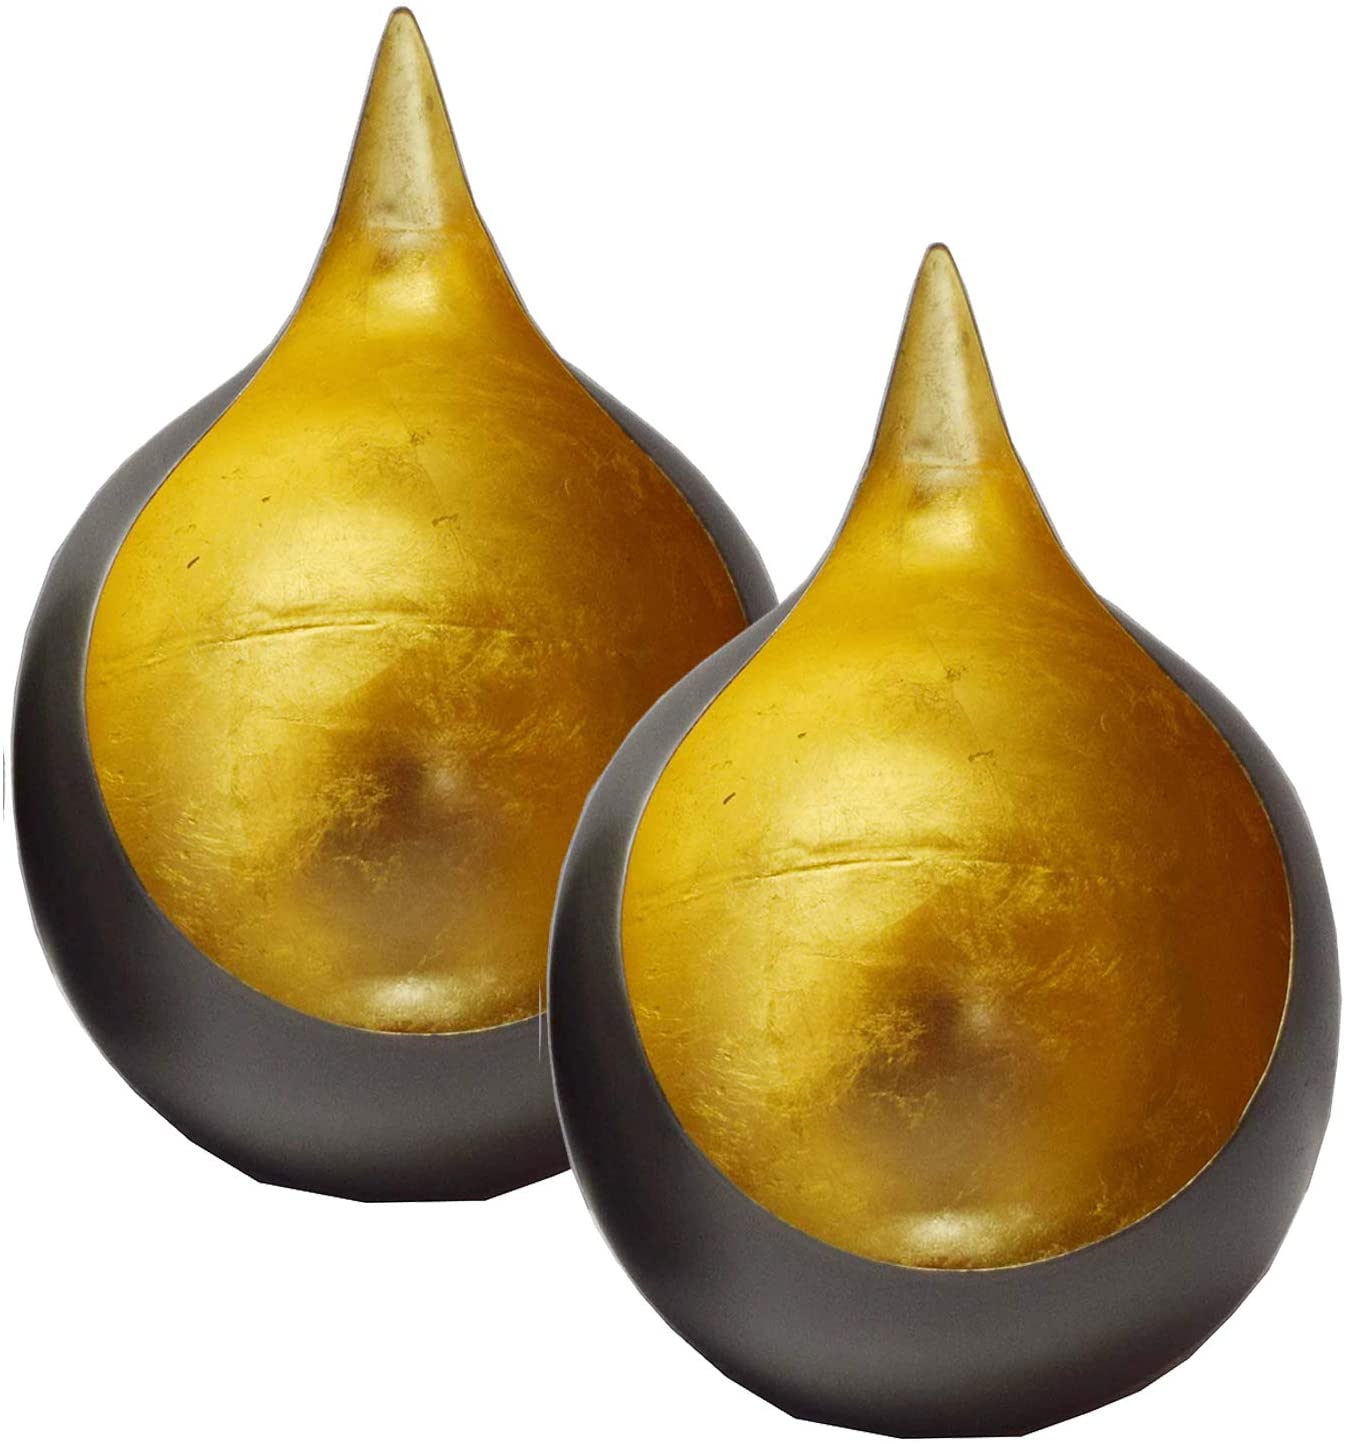 Gold and Black Tea-Light Candle Holders - Decozen